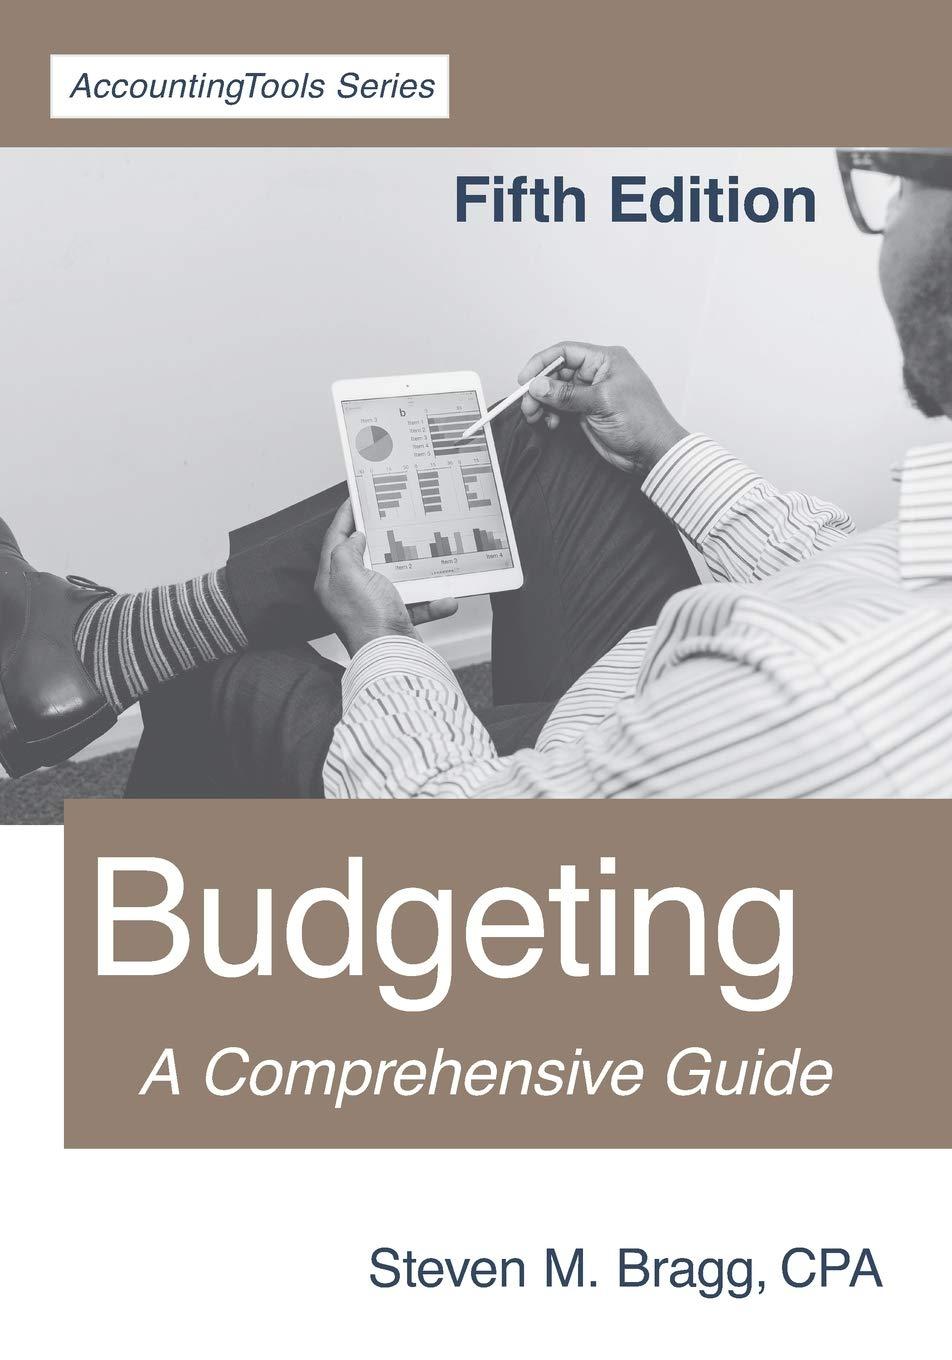 Budgeting A Comprehensive Guide